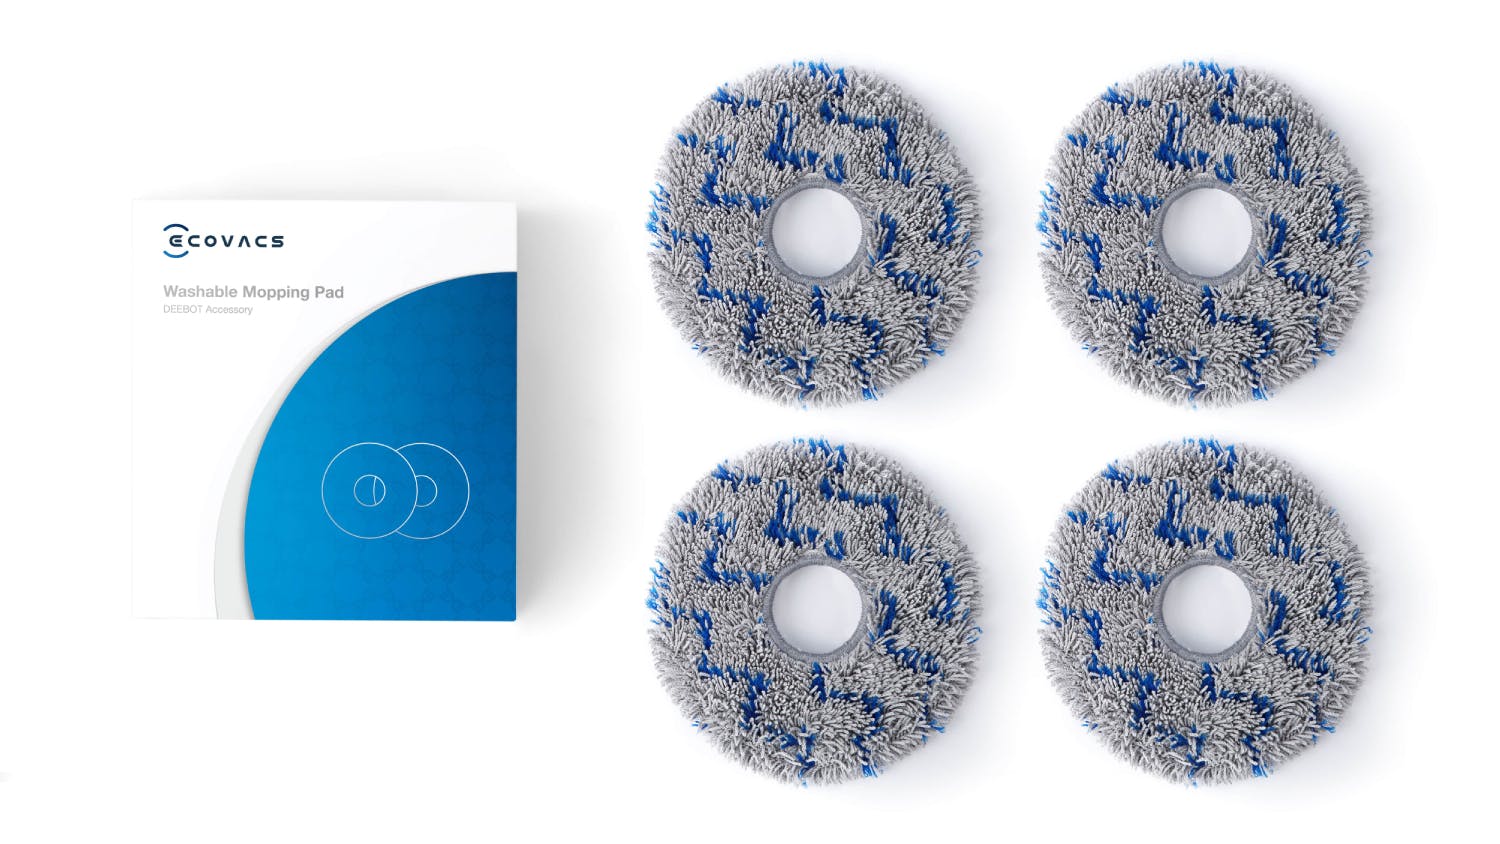 ECOVACS DEEBOT X1 Series Washable Mopping Pads - 2 Pack